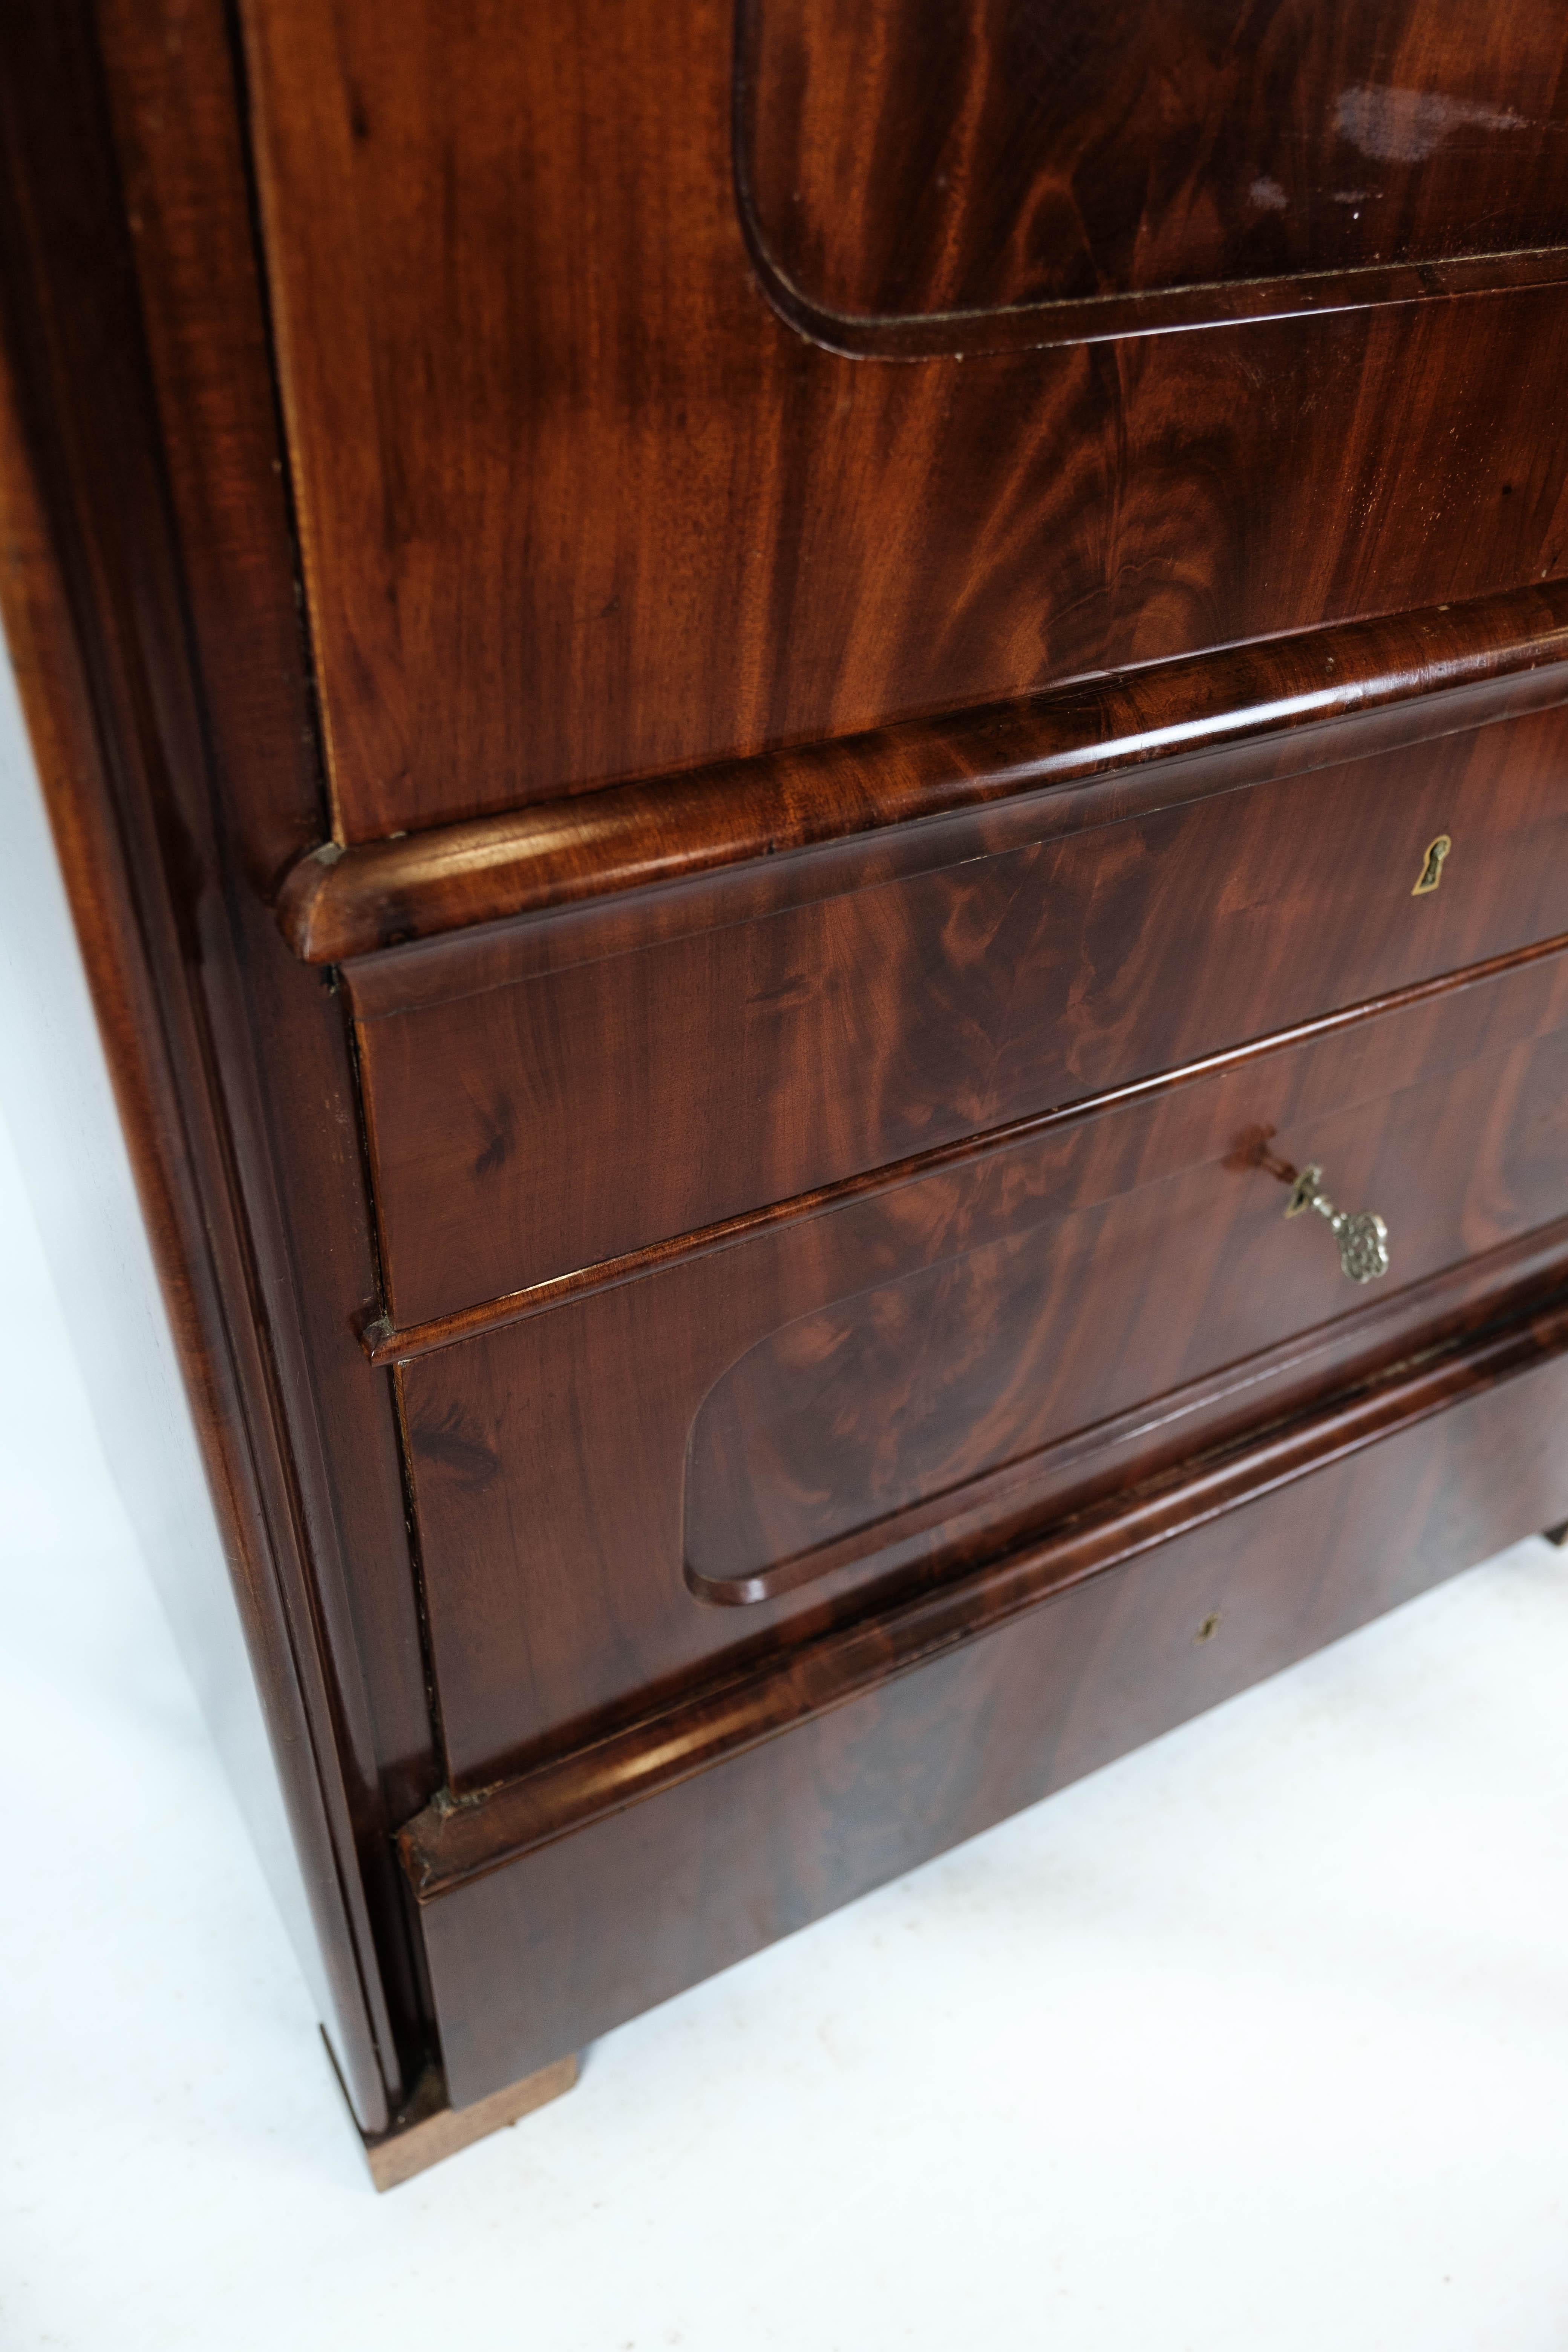 Other Secretary Made In Mahogany WQith Inlaid Wood From 1840s For Sale